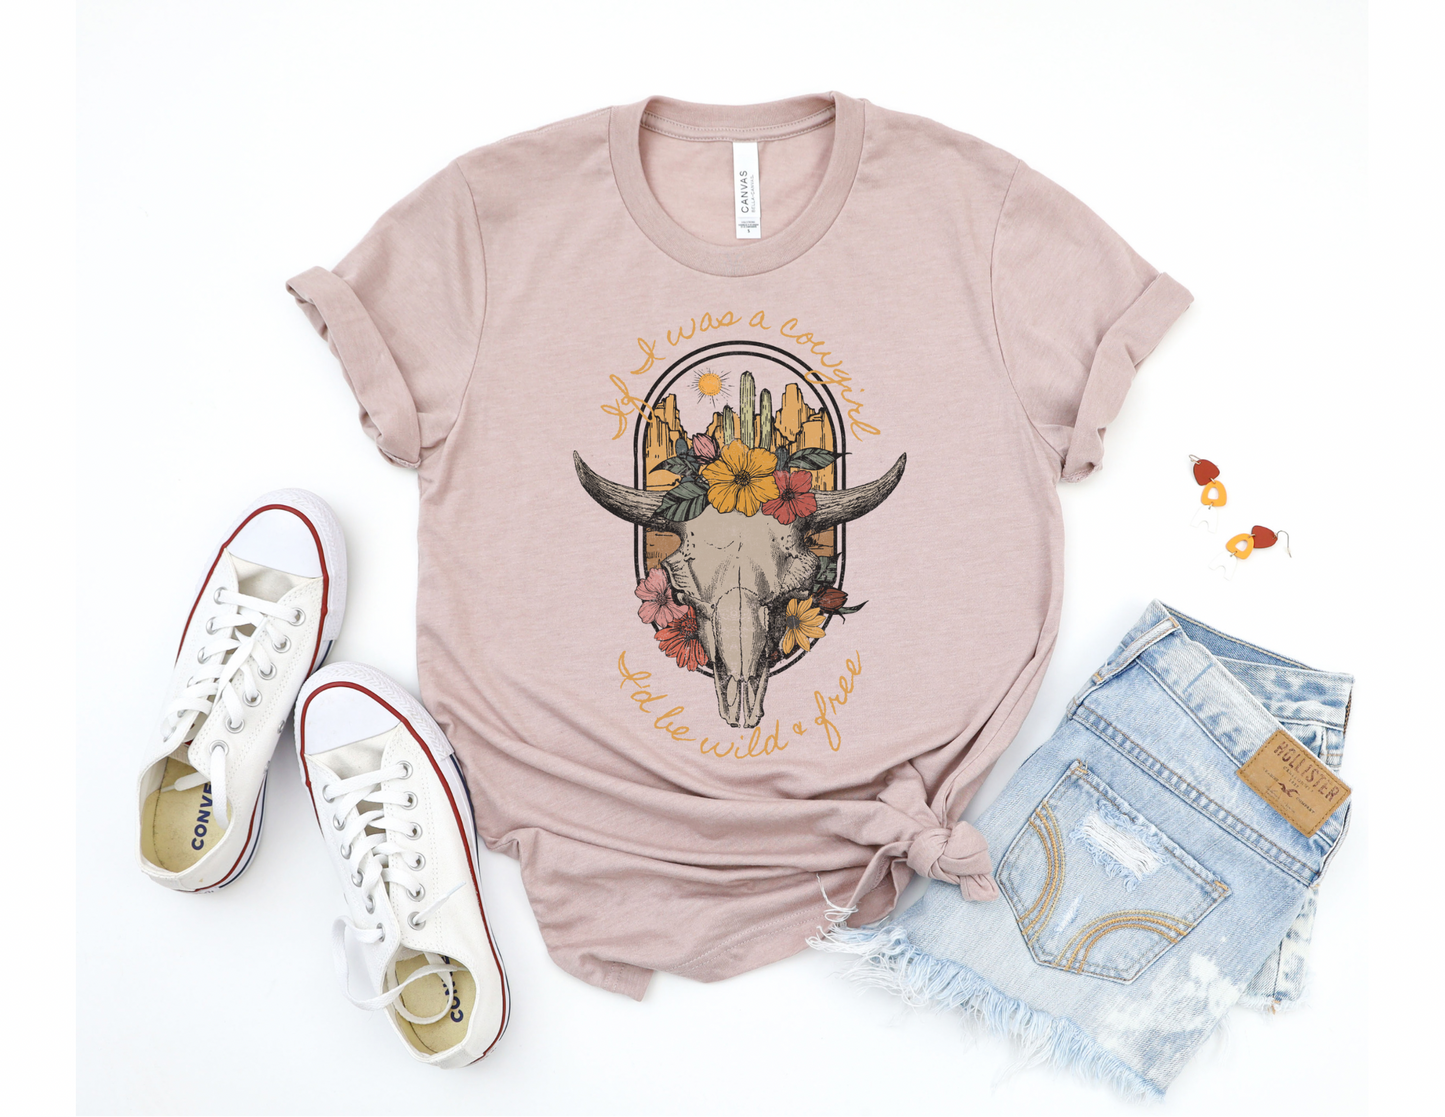 If I Was A Cowgirl I’d Be Wild & Free Shirt